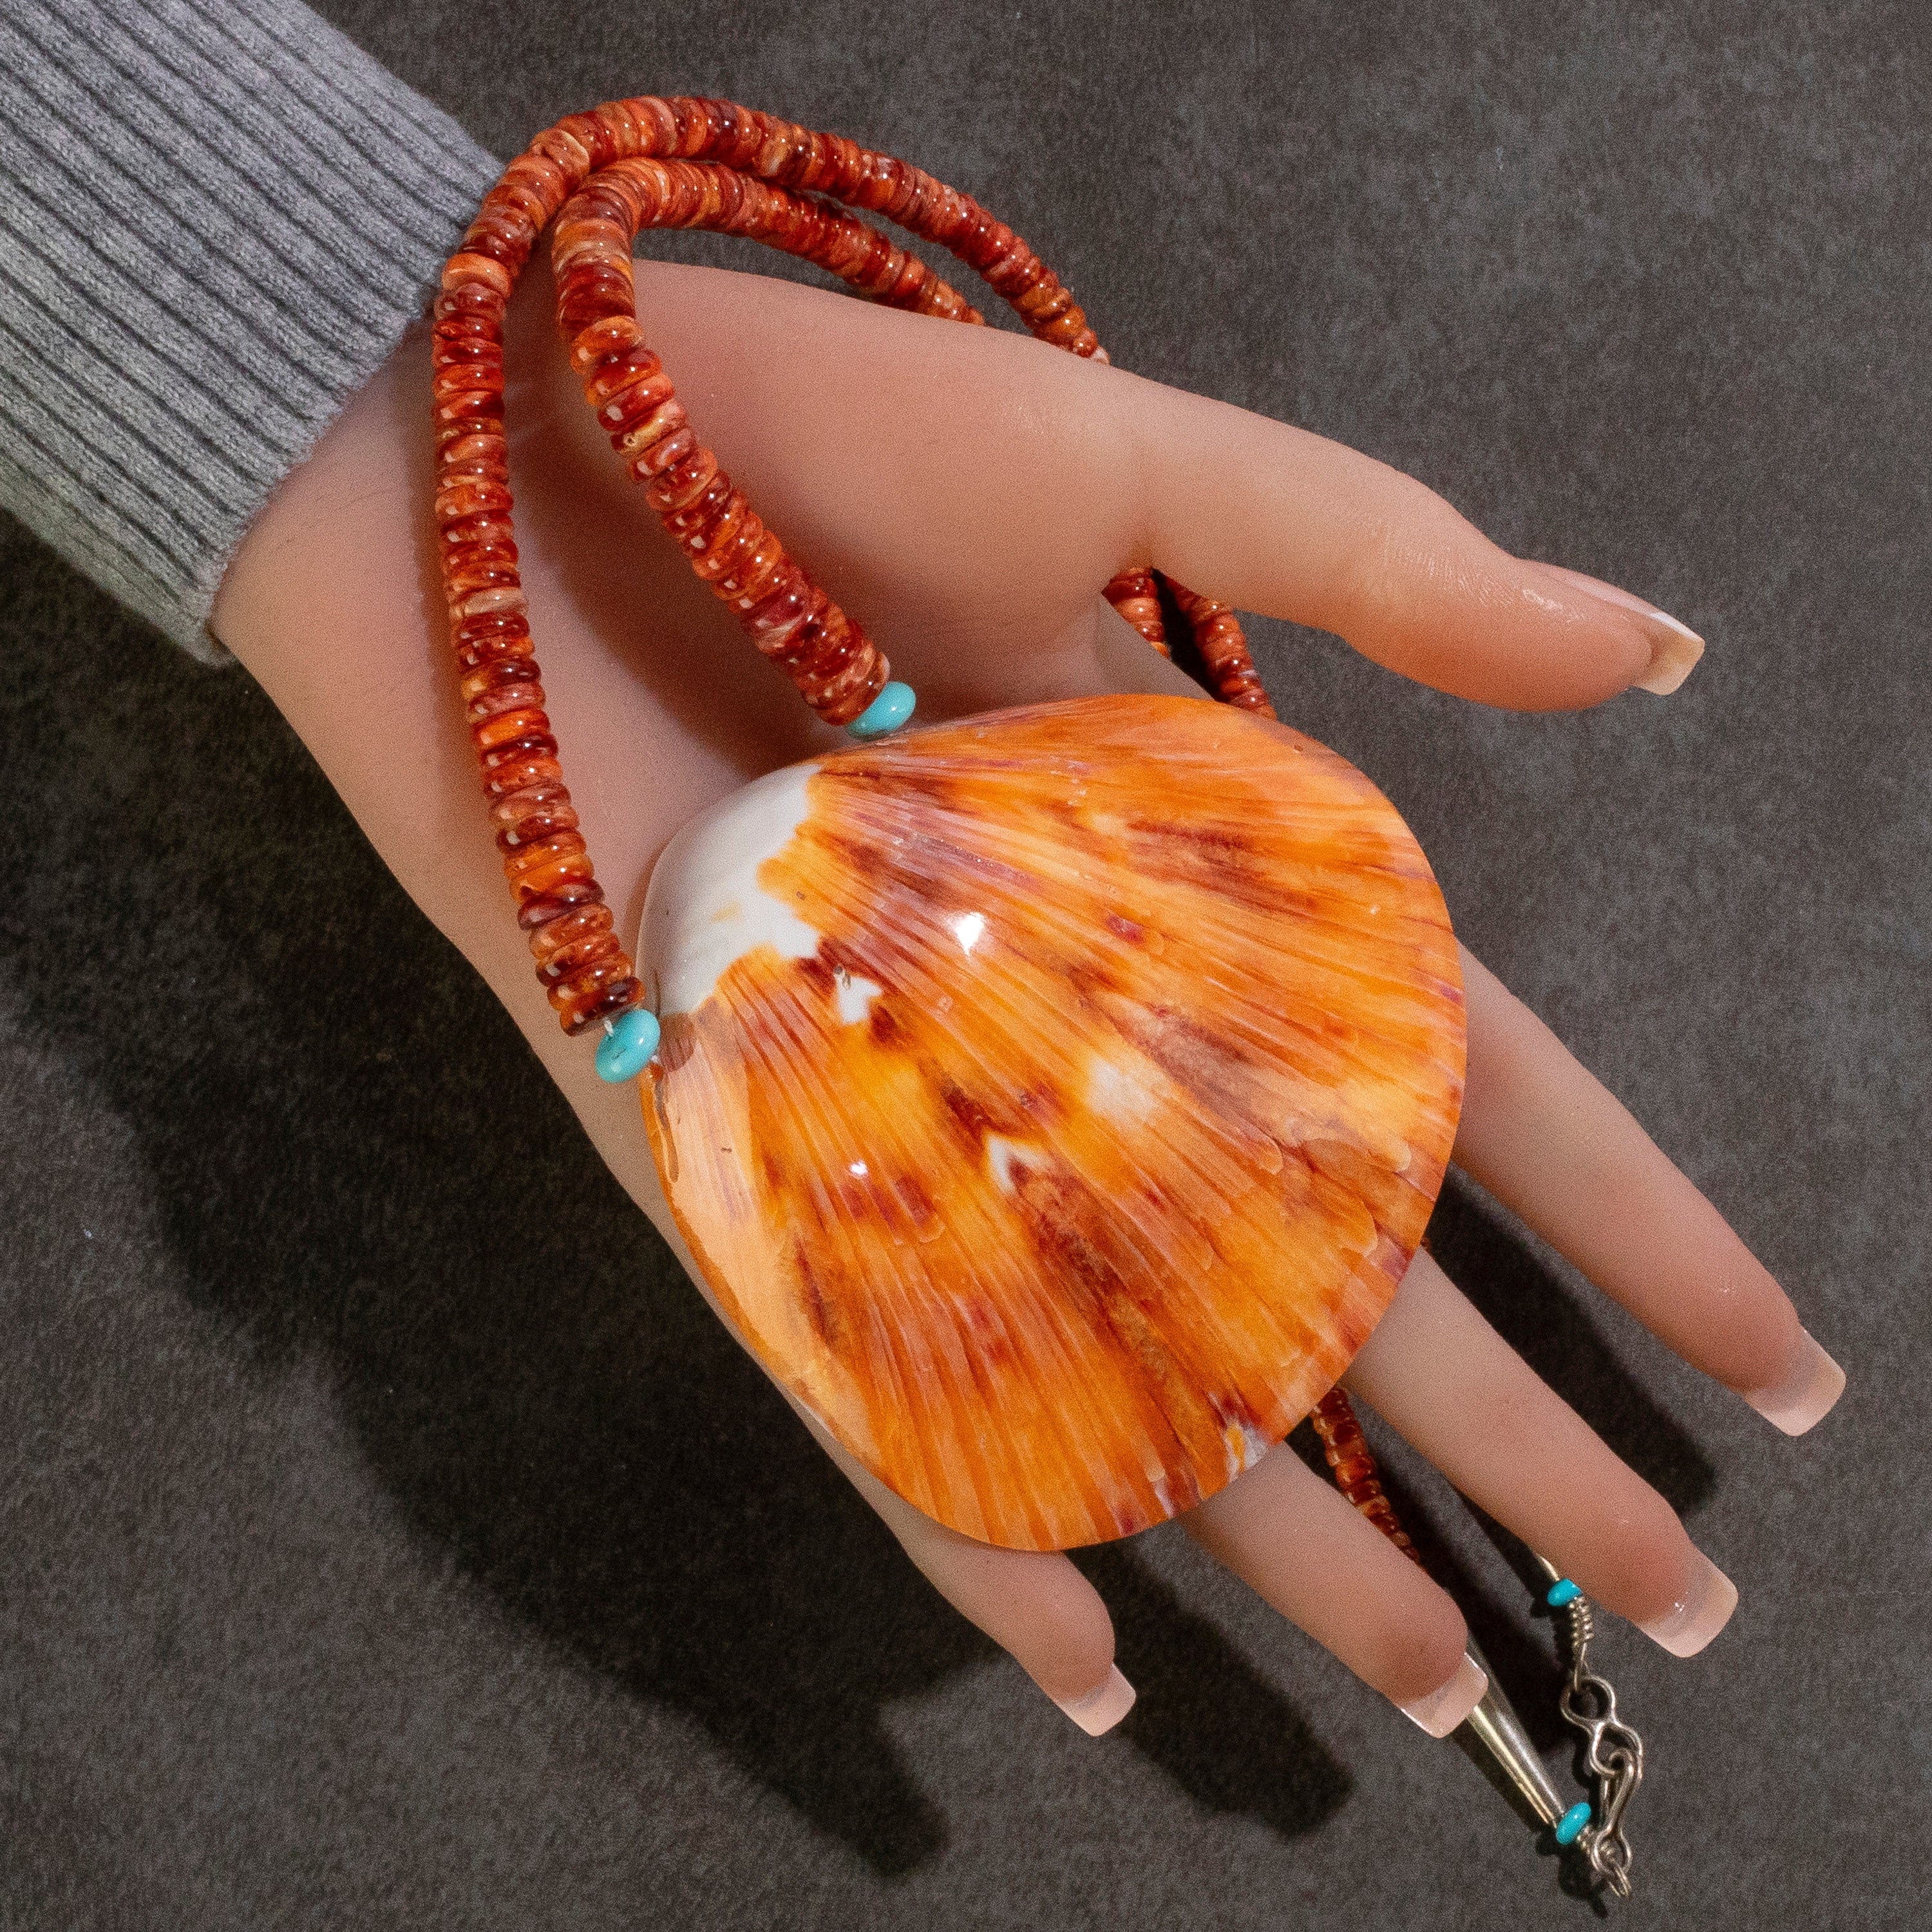 Kalifano Native American Jewelry 27" Orange Spiny Oyster Shell & Turquoise USA Native American Made 925 Sterling Silver Heishi Bead Necklace NAN1200.024